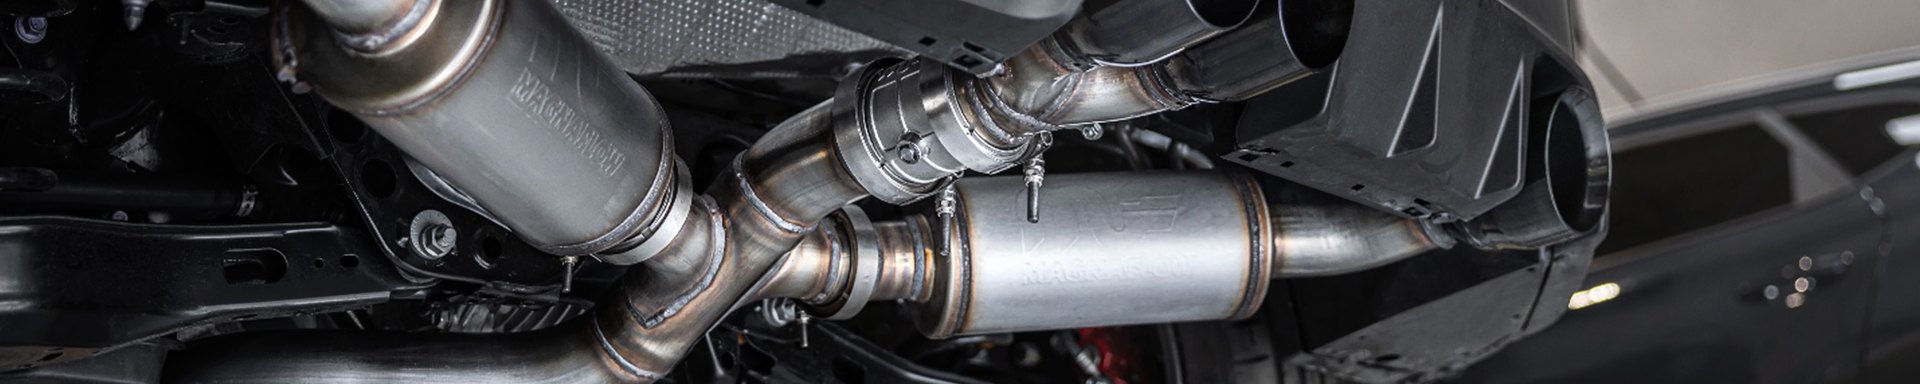 Chevy S-10 Pickup Performance Exhaust Systems